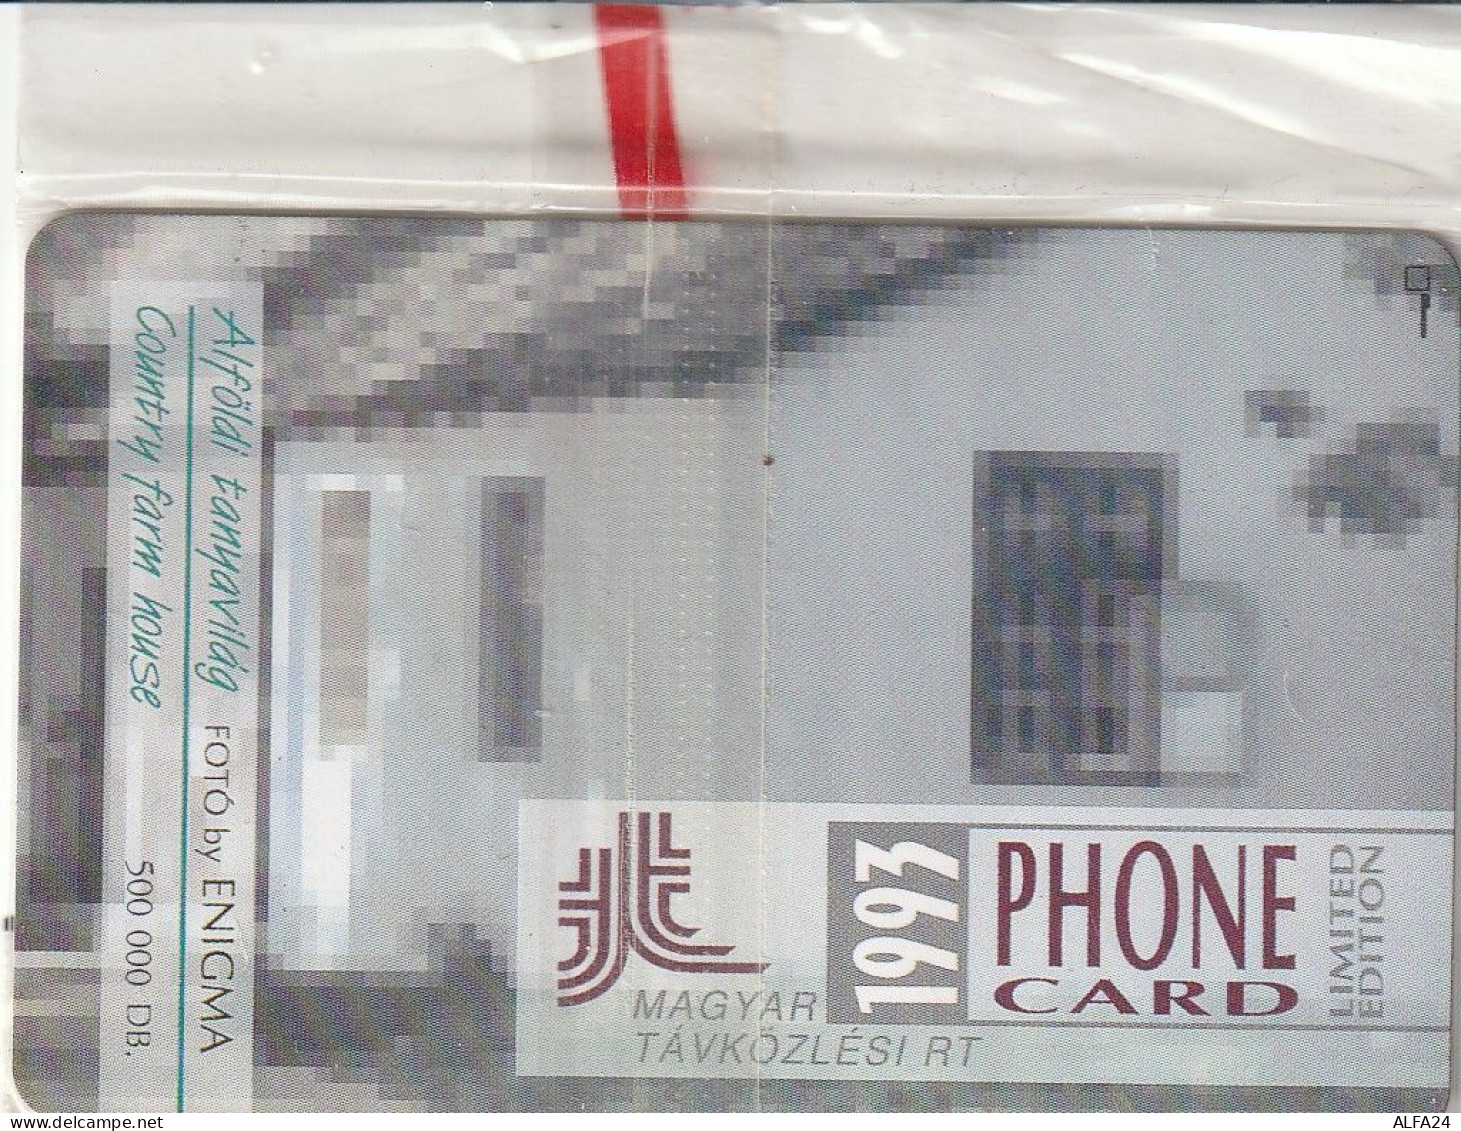 PHONE CARD UNGHERIA BLISTER (CZ1498 - Hungary